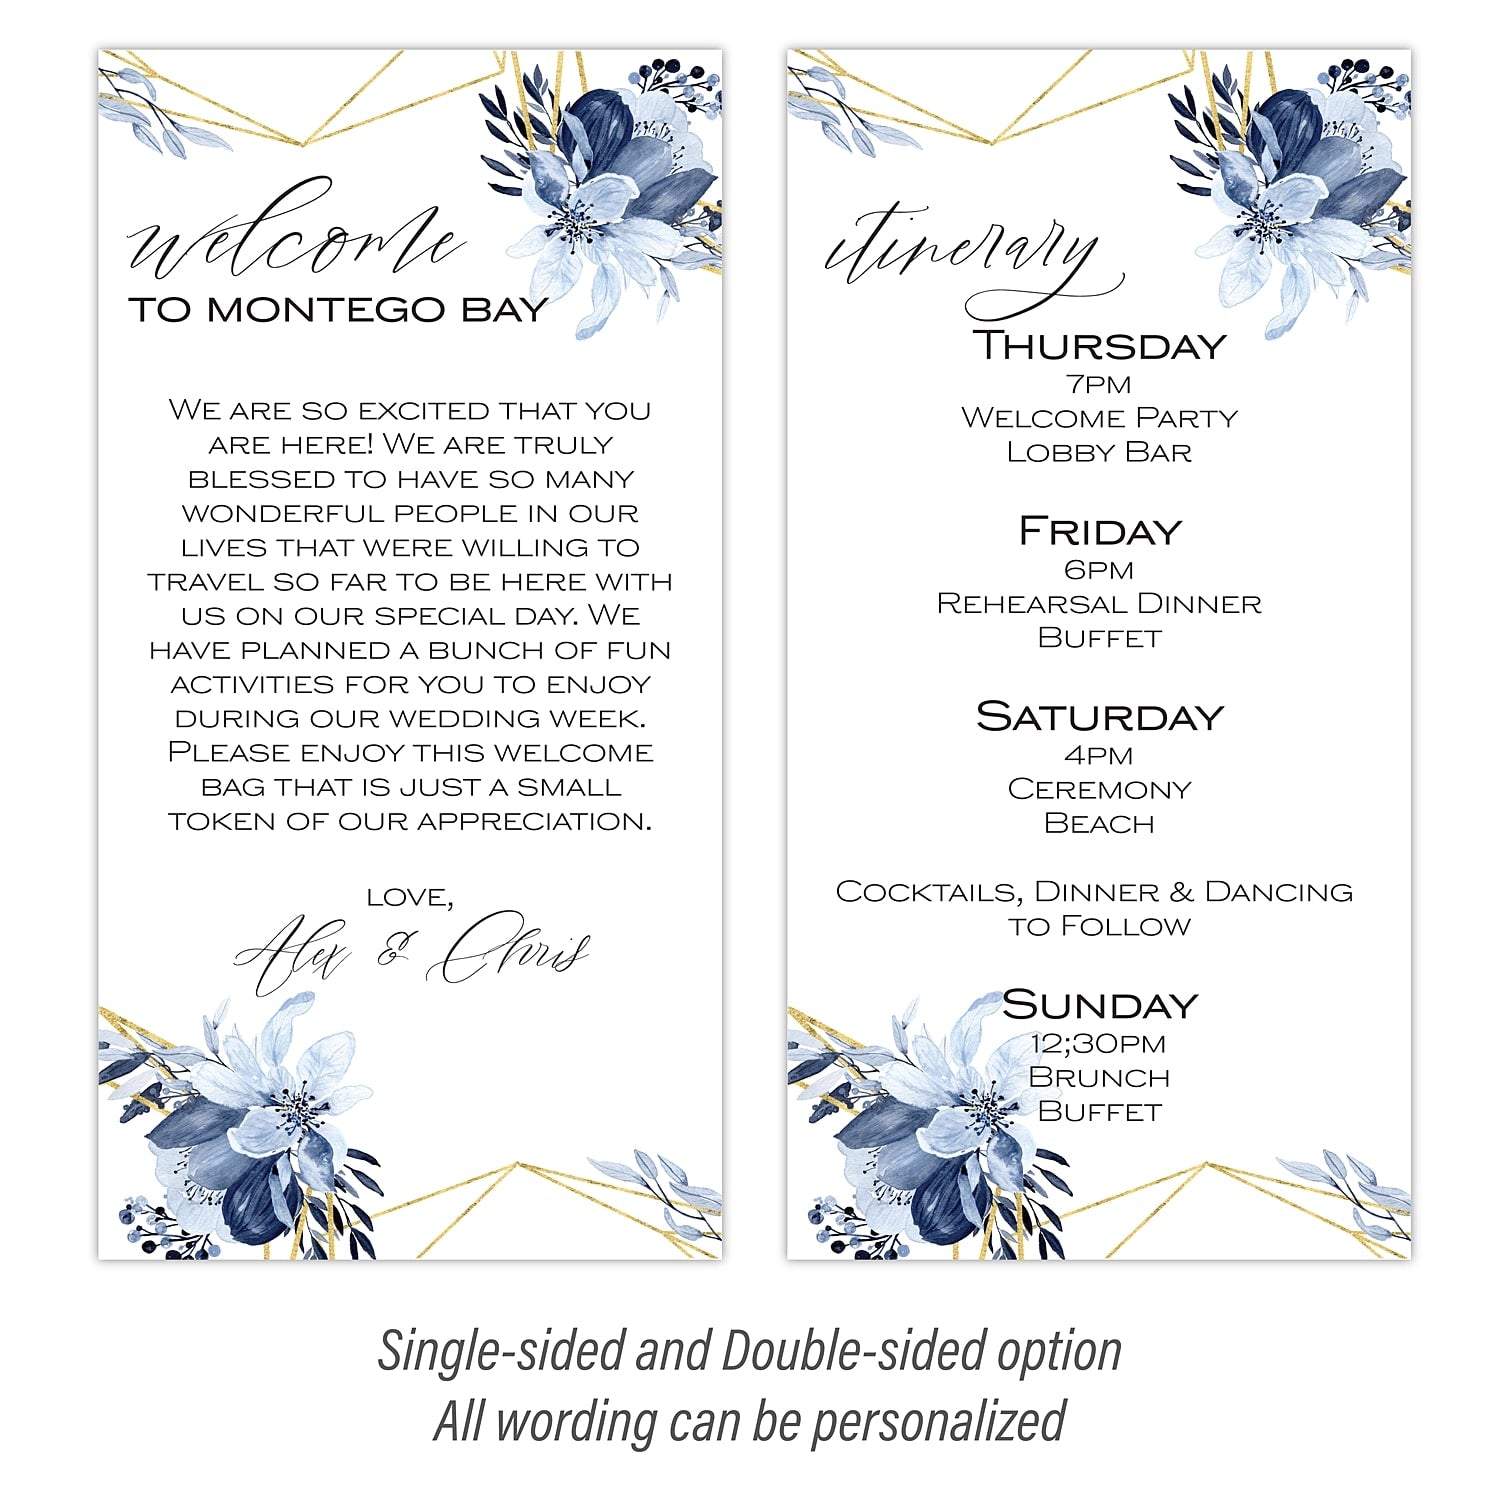 Personalized Wedding Welcome Letter & Itinerary - Dainty Dusty Blue